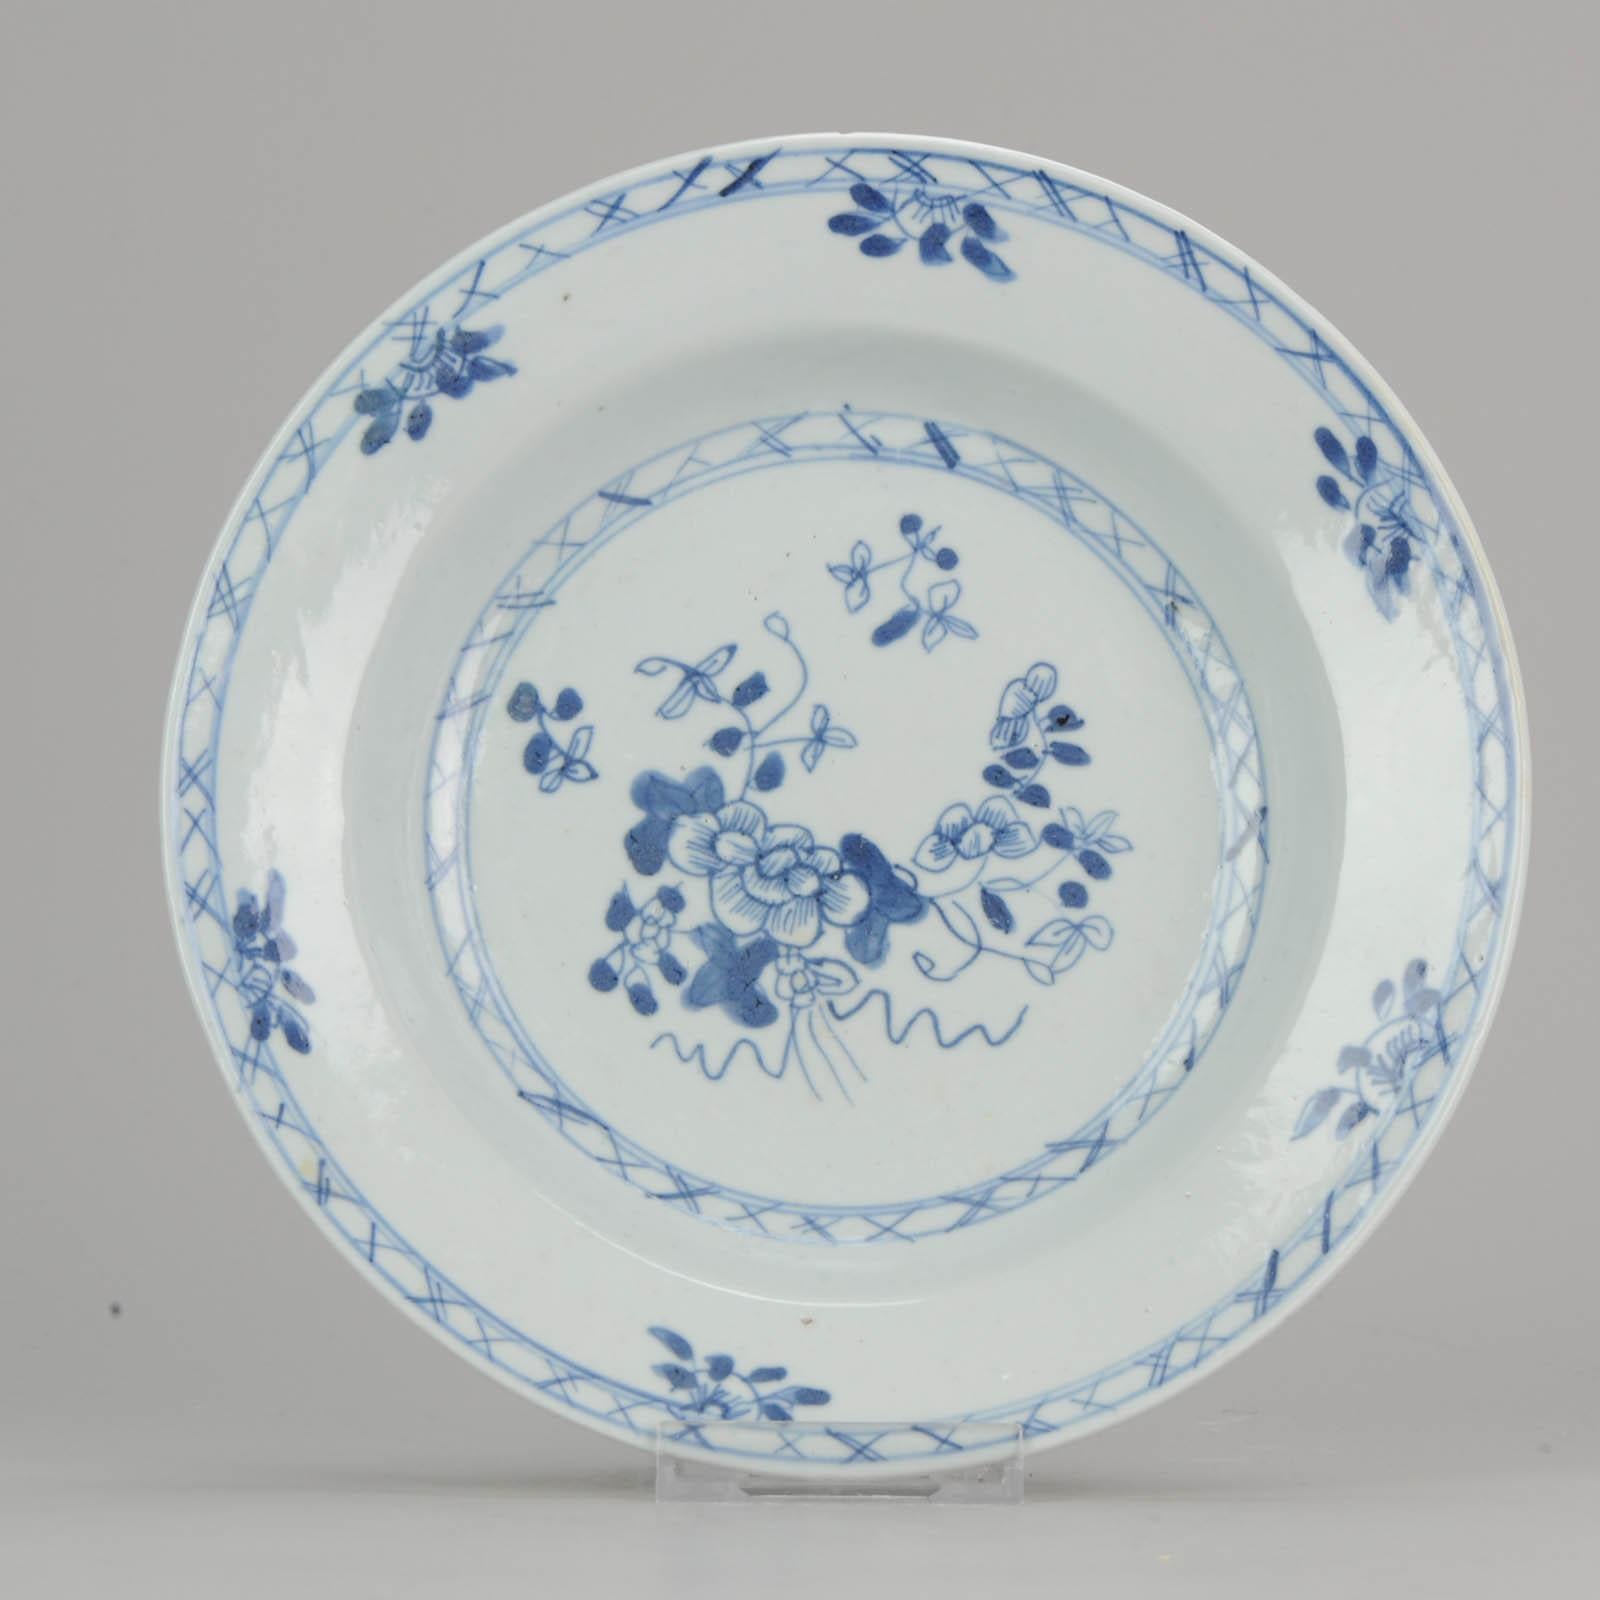 Set of Chinese Blue and White Plate for Wall Decoration Porcelain China In Good Condition For Sale In Amsterdam, Noord Holland